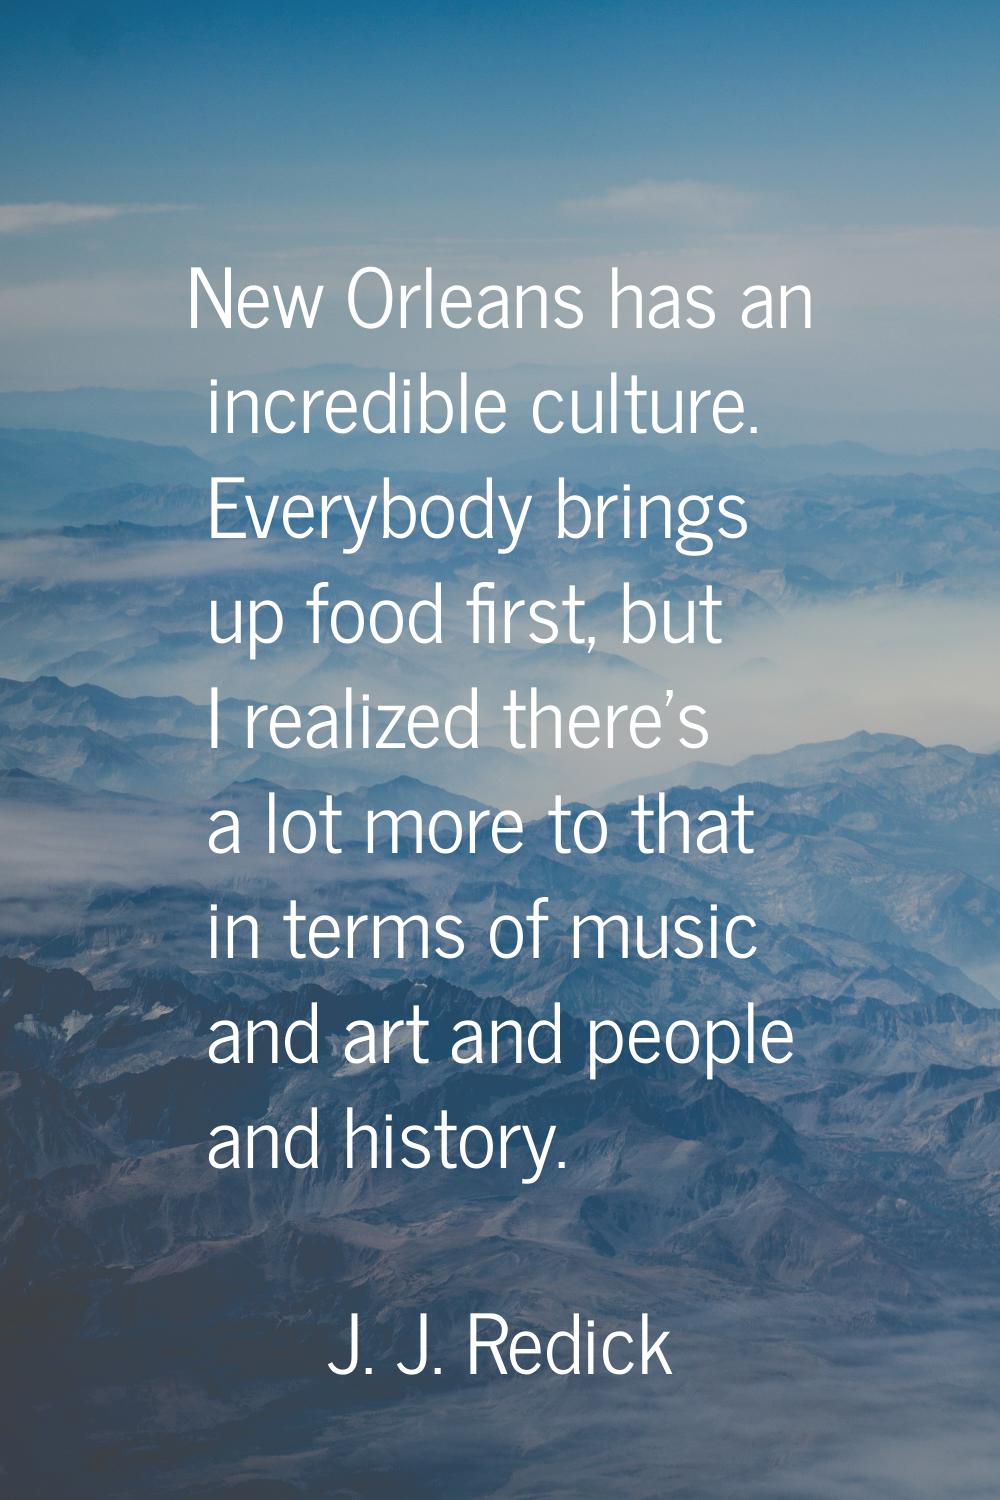 New Orleans has an incredible culture. Everybody brings up food first, but I realized there's a lot